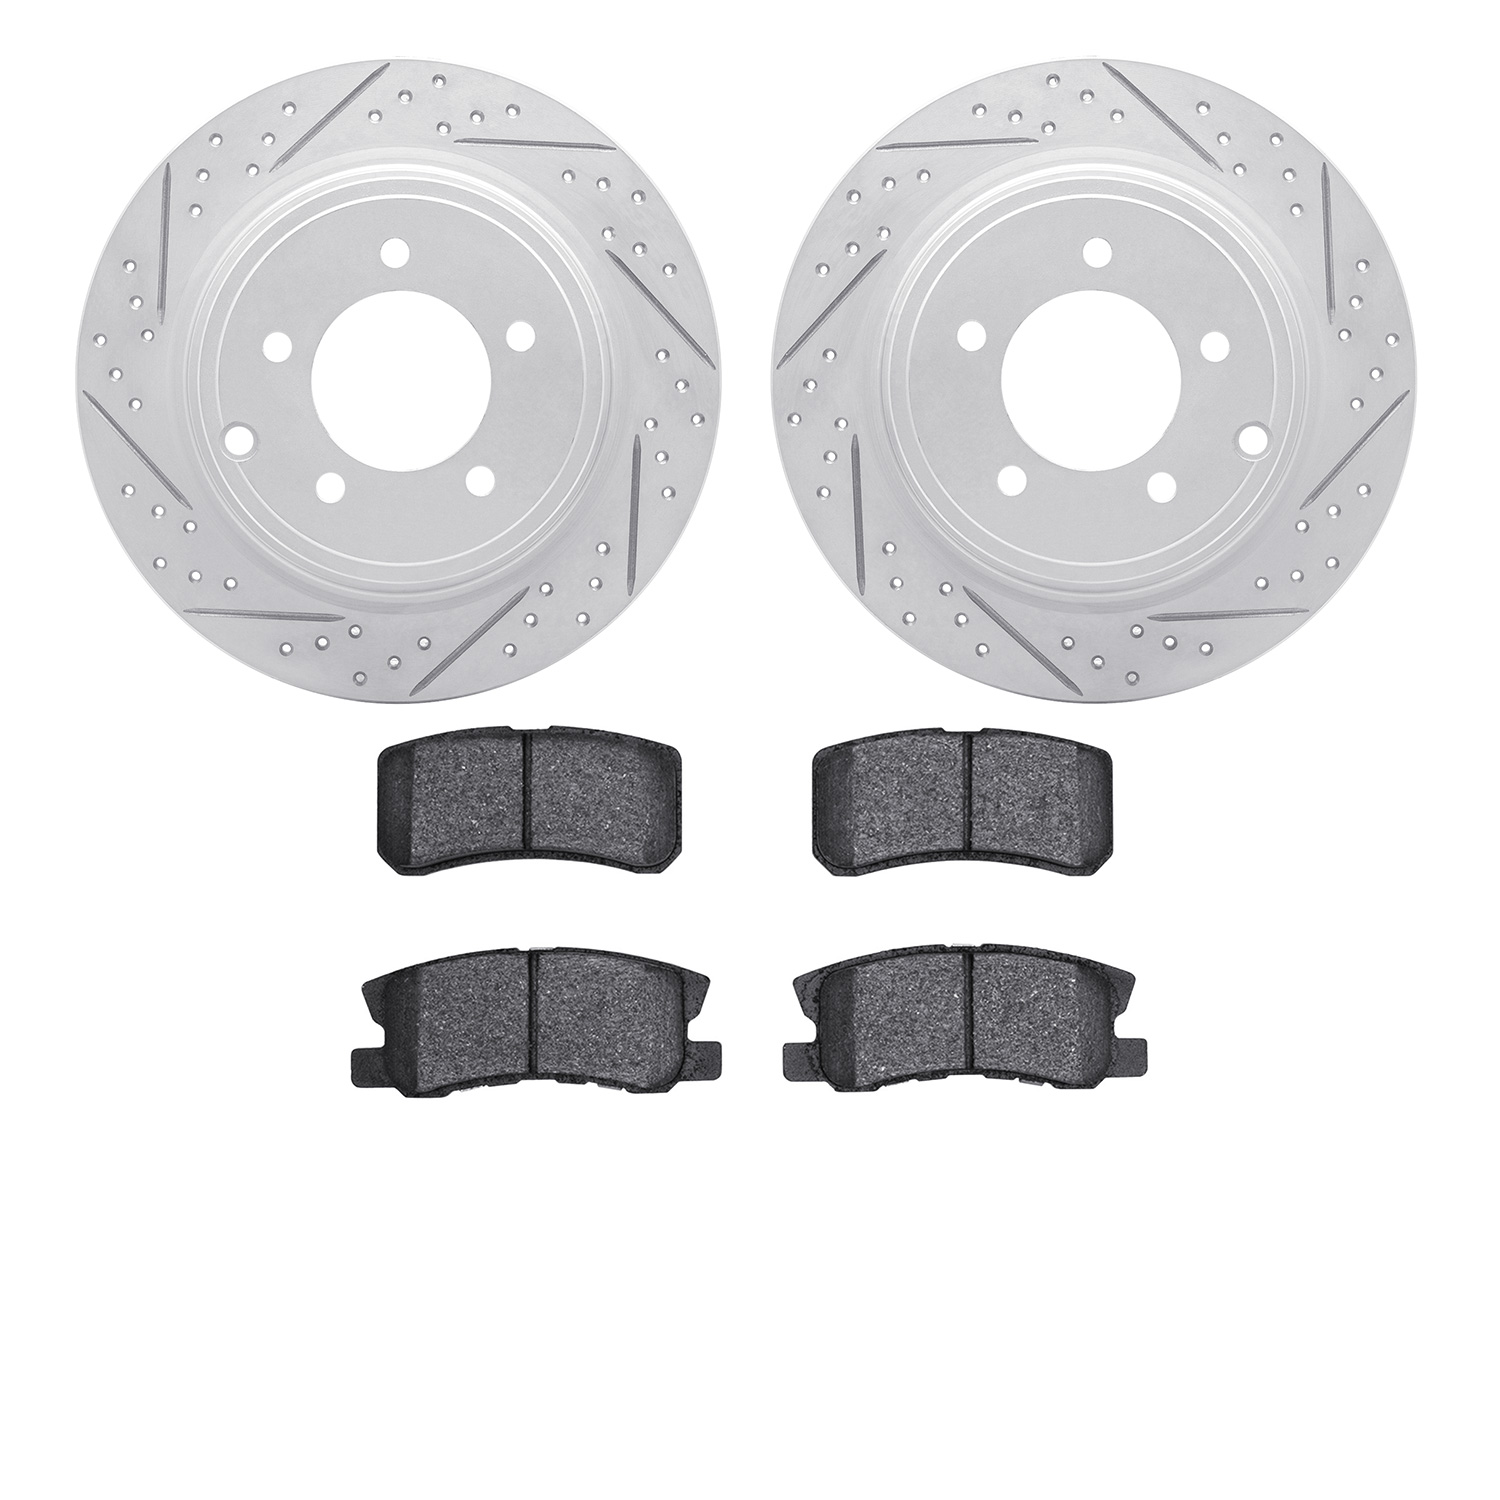 2502-39027 Geoperformance Drilled/Slotted Rotors w/5000 Advanced Brake Pads Kit, 2007-2017 Multiple Makes/Models, Position: Rear